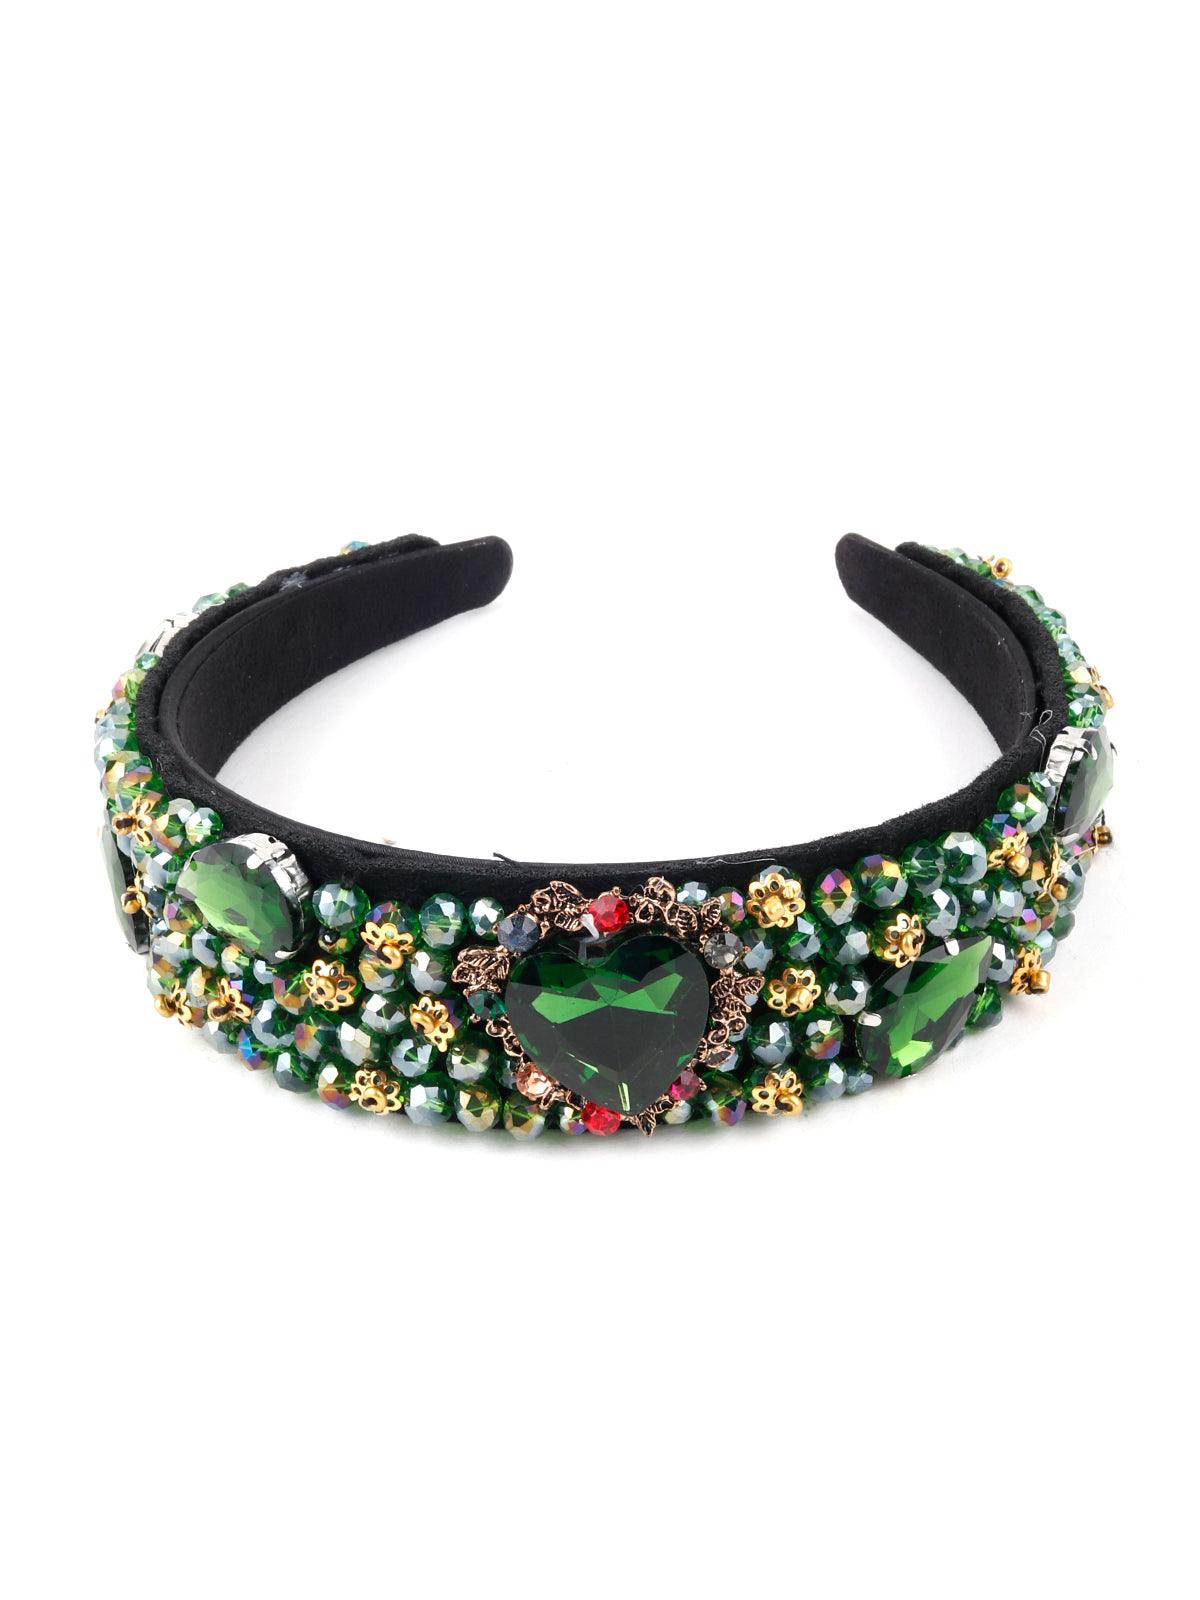 Drama Hype Multicolor Hair band - Odette